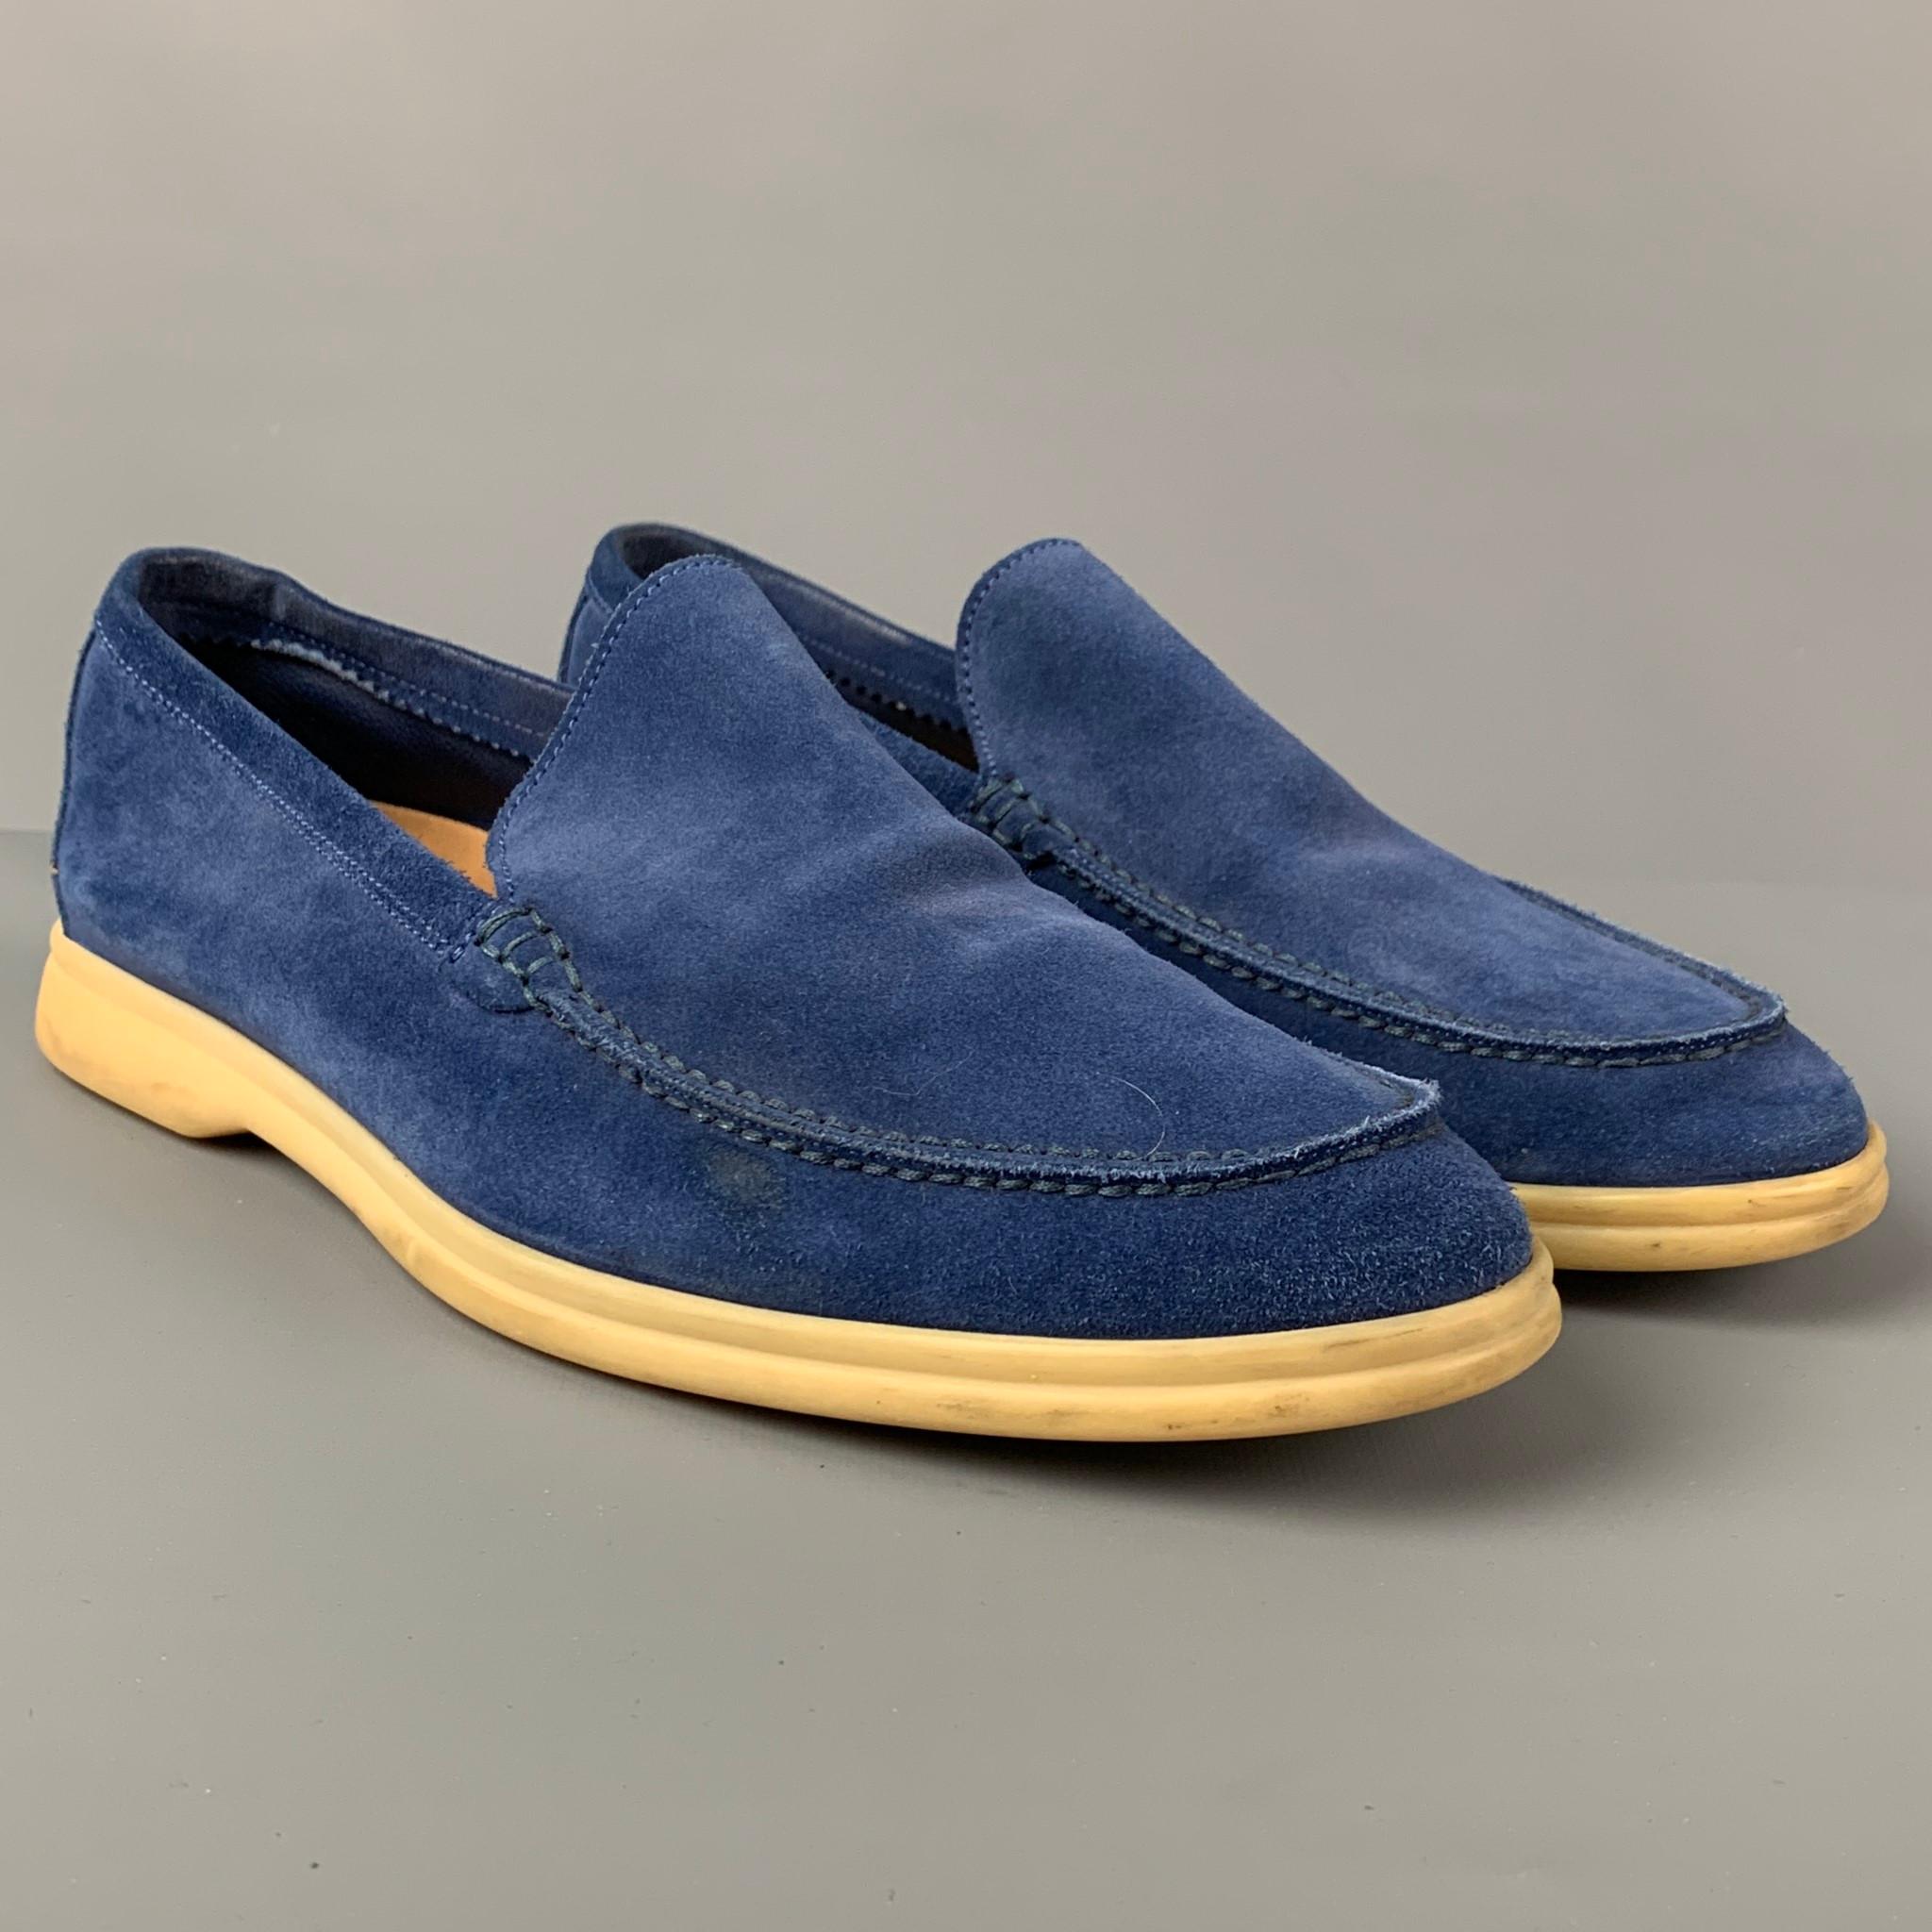 LORO PIANA 'Summer Walk' loafers comes in a blue suede featuring a slip on style and a rubber sole. Includes box. 

Very Good Pre-Owned Condition.
Marked: 43
Original Retail Price: $745.00

Outsole: 12 in. x 4 in. 